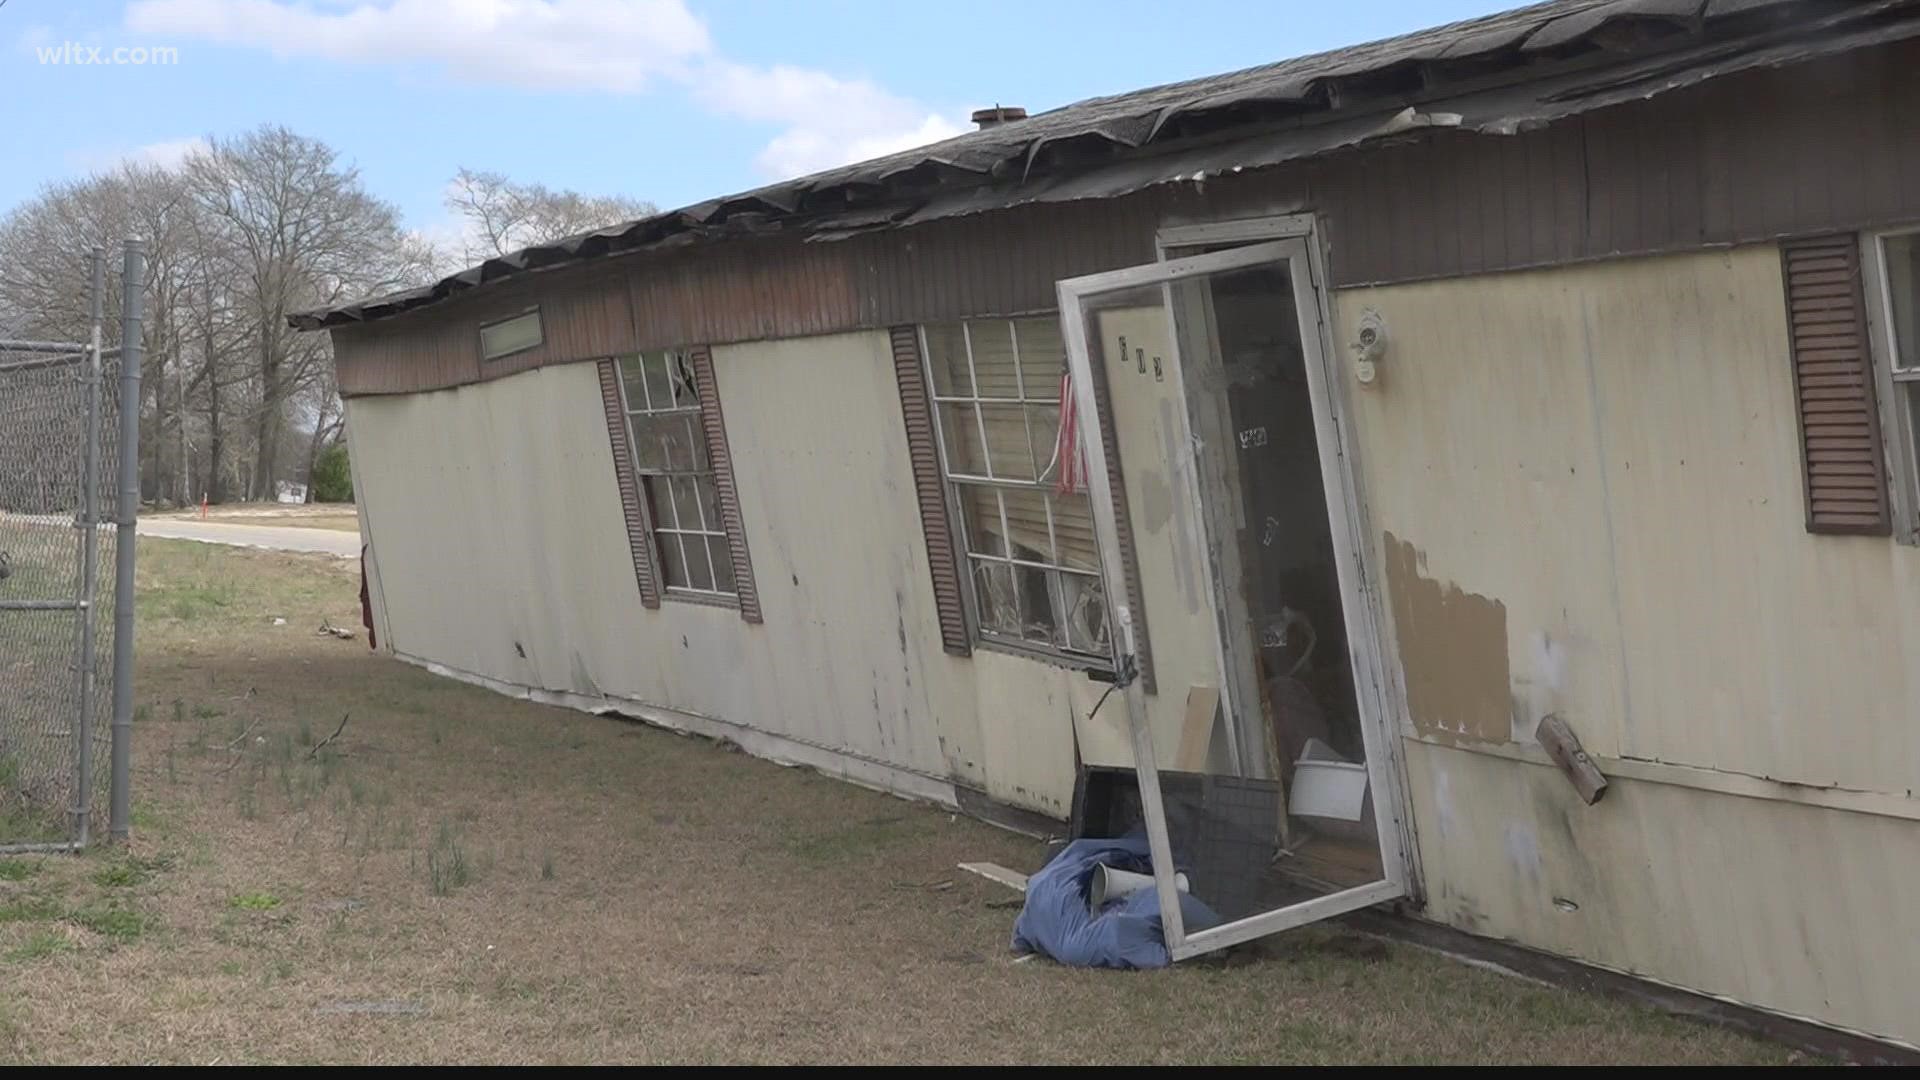 Our reporter Rachel Ripp spoke with the owner of the abandoned mobile home.